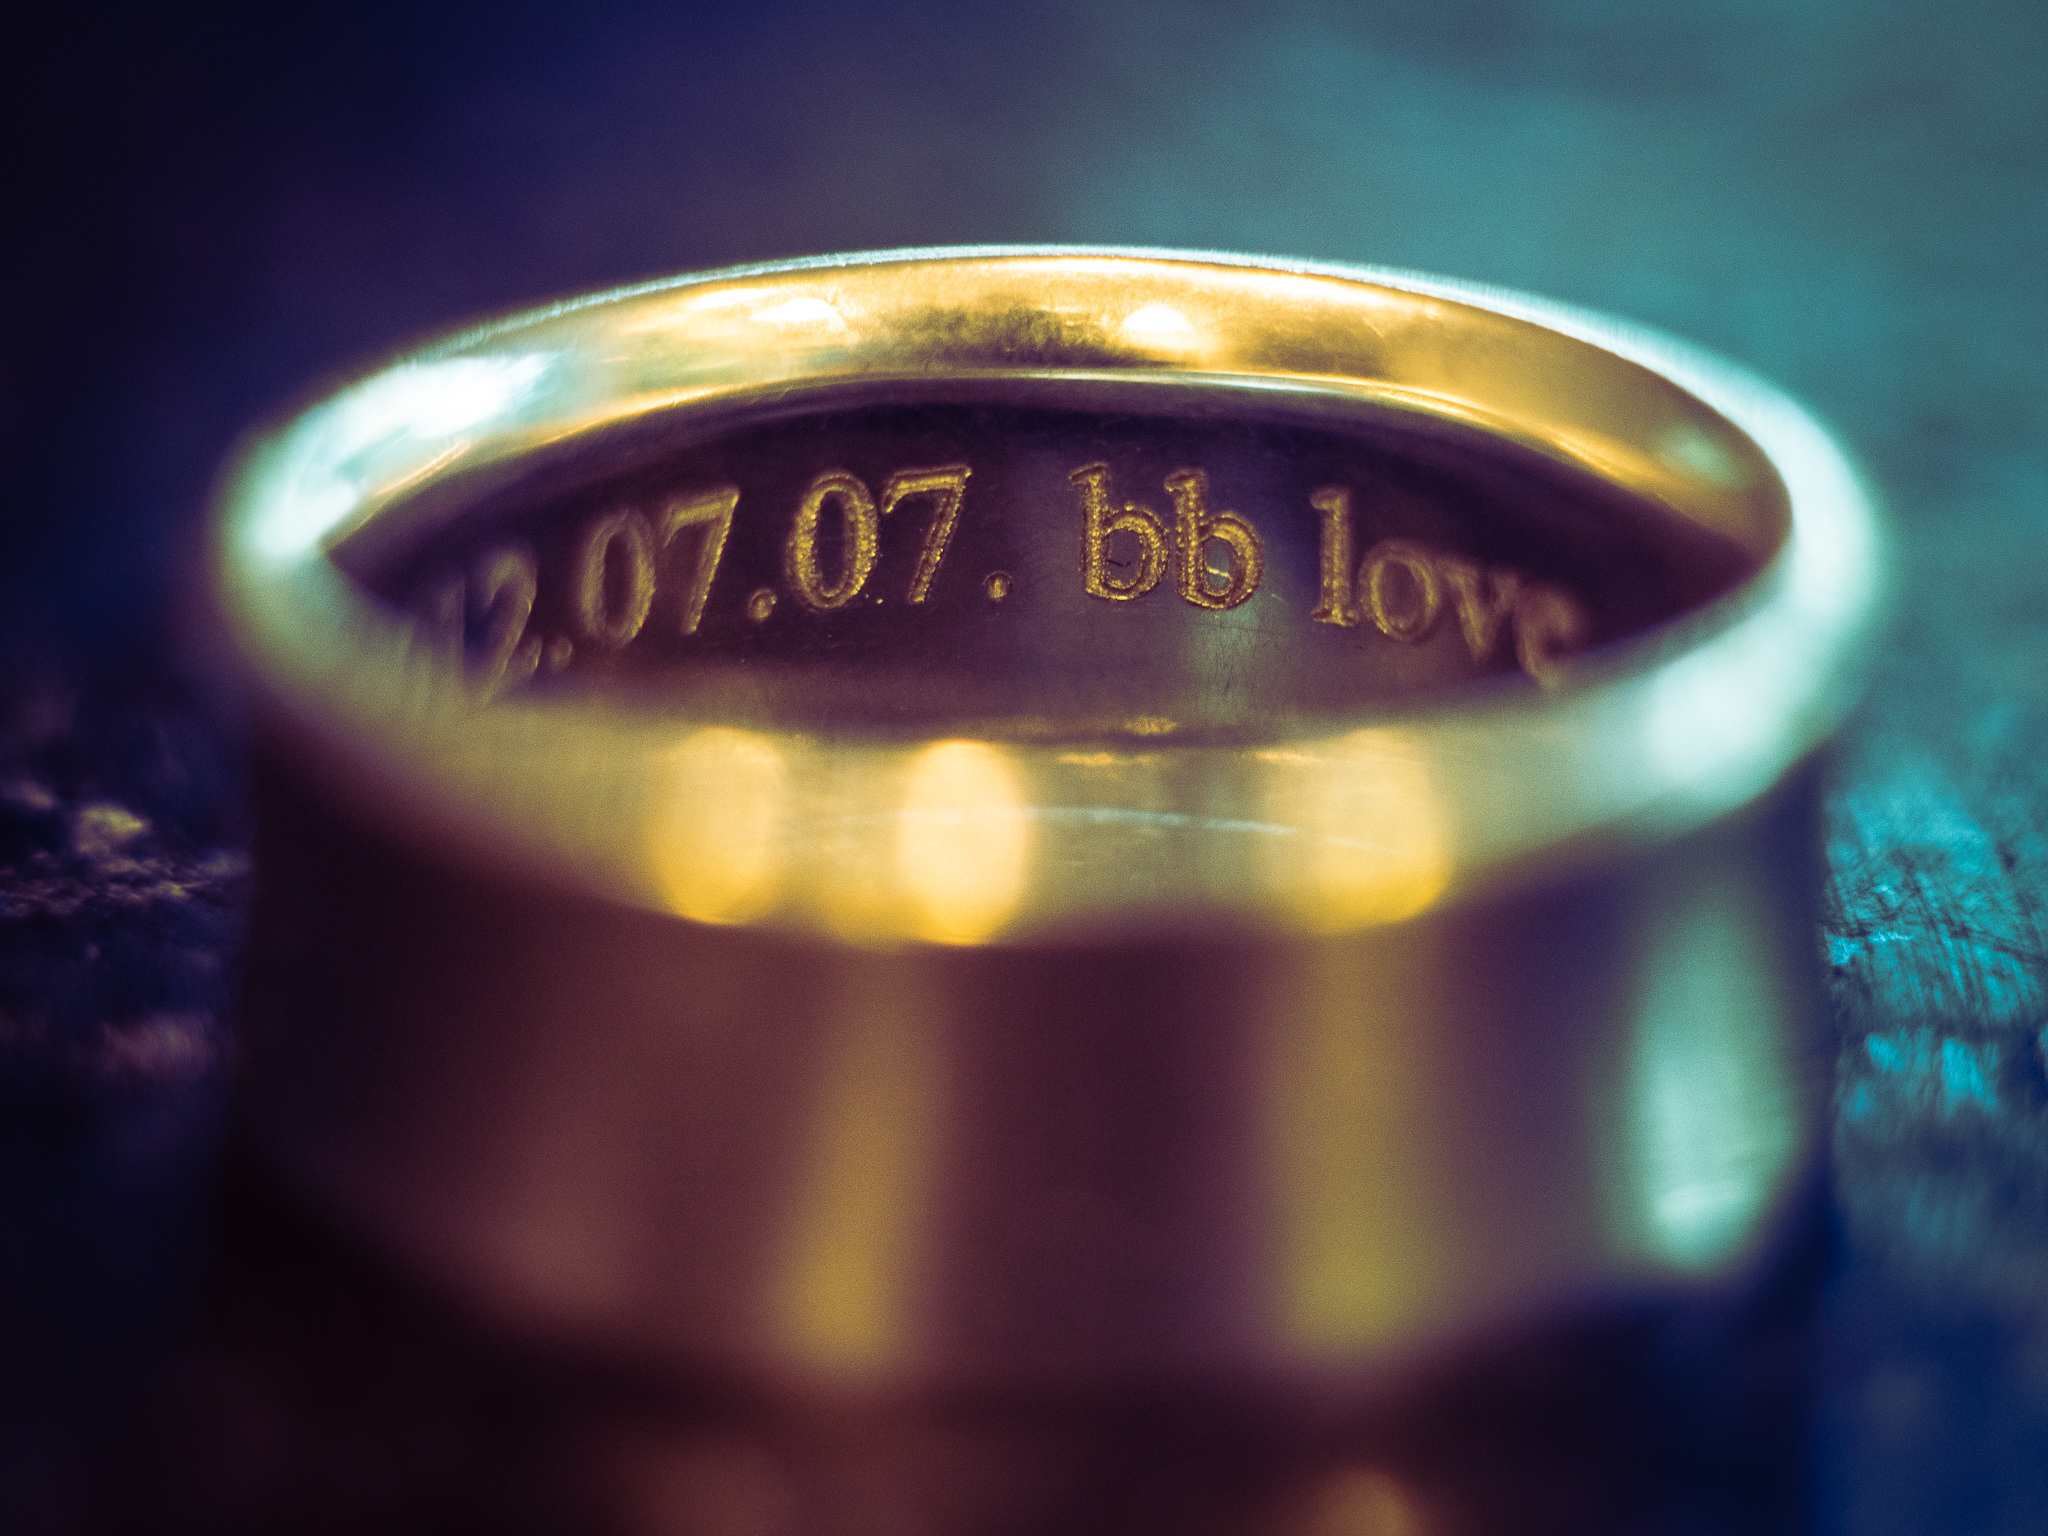 Wedding ring photographed with a Helios 44-2 2/58 lens and macro extension tubes